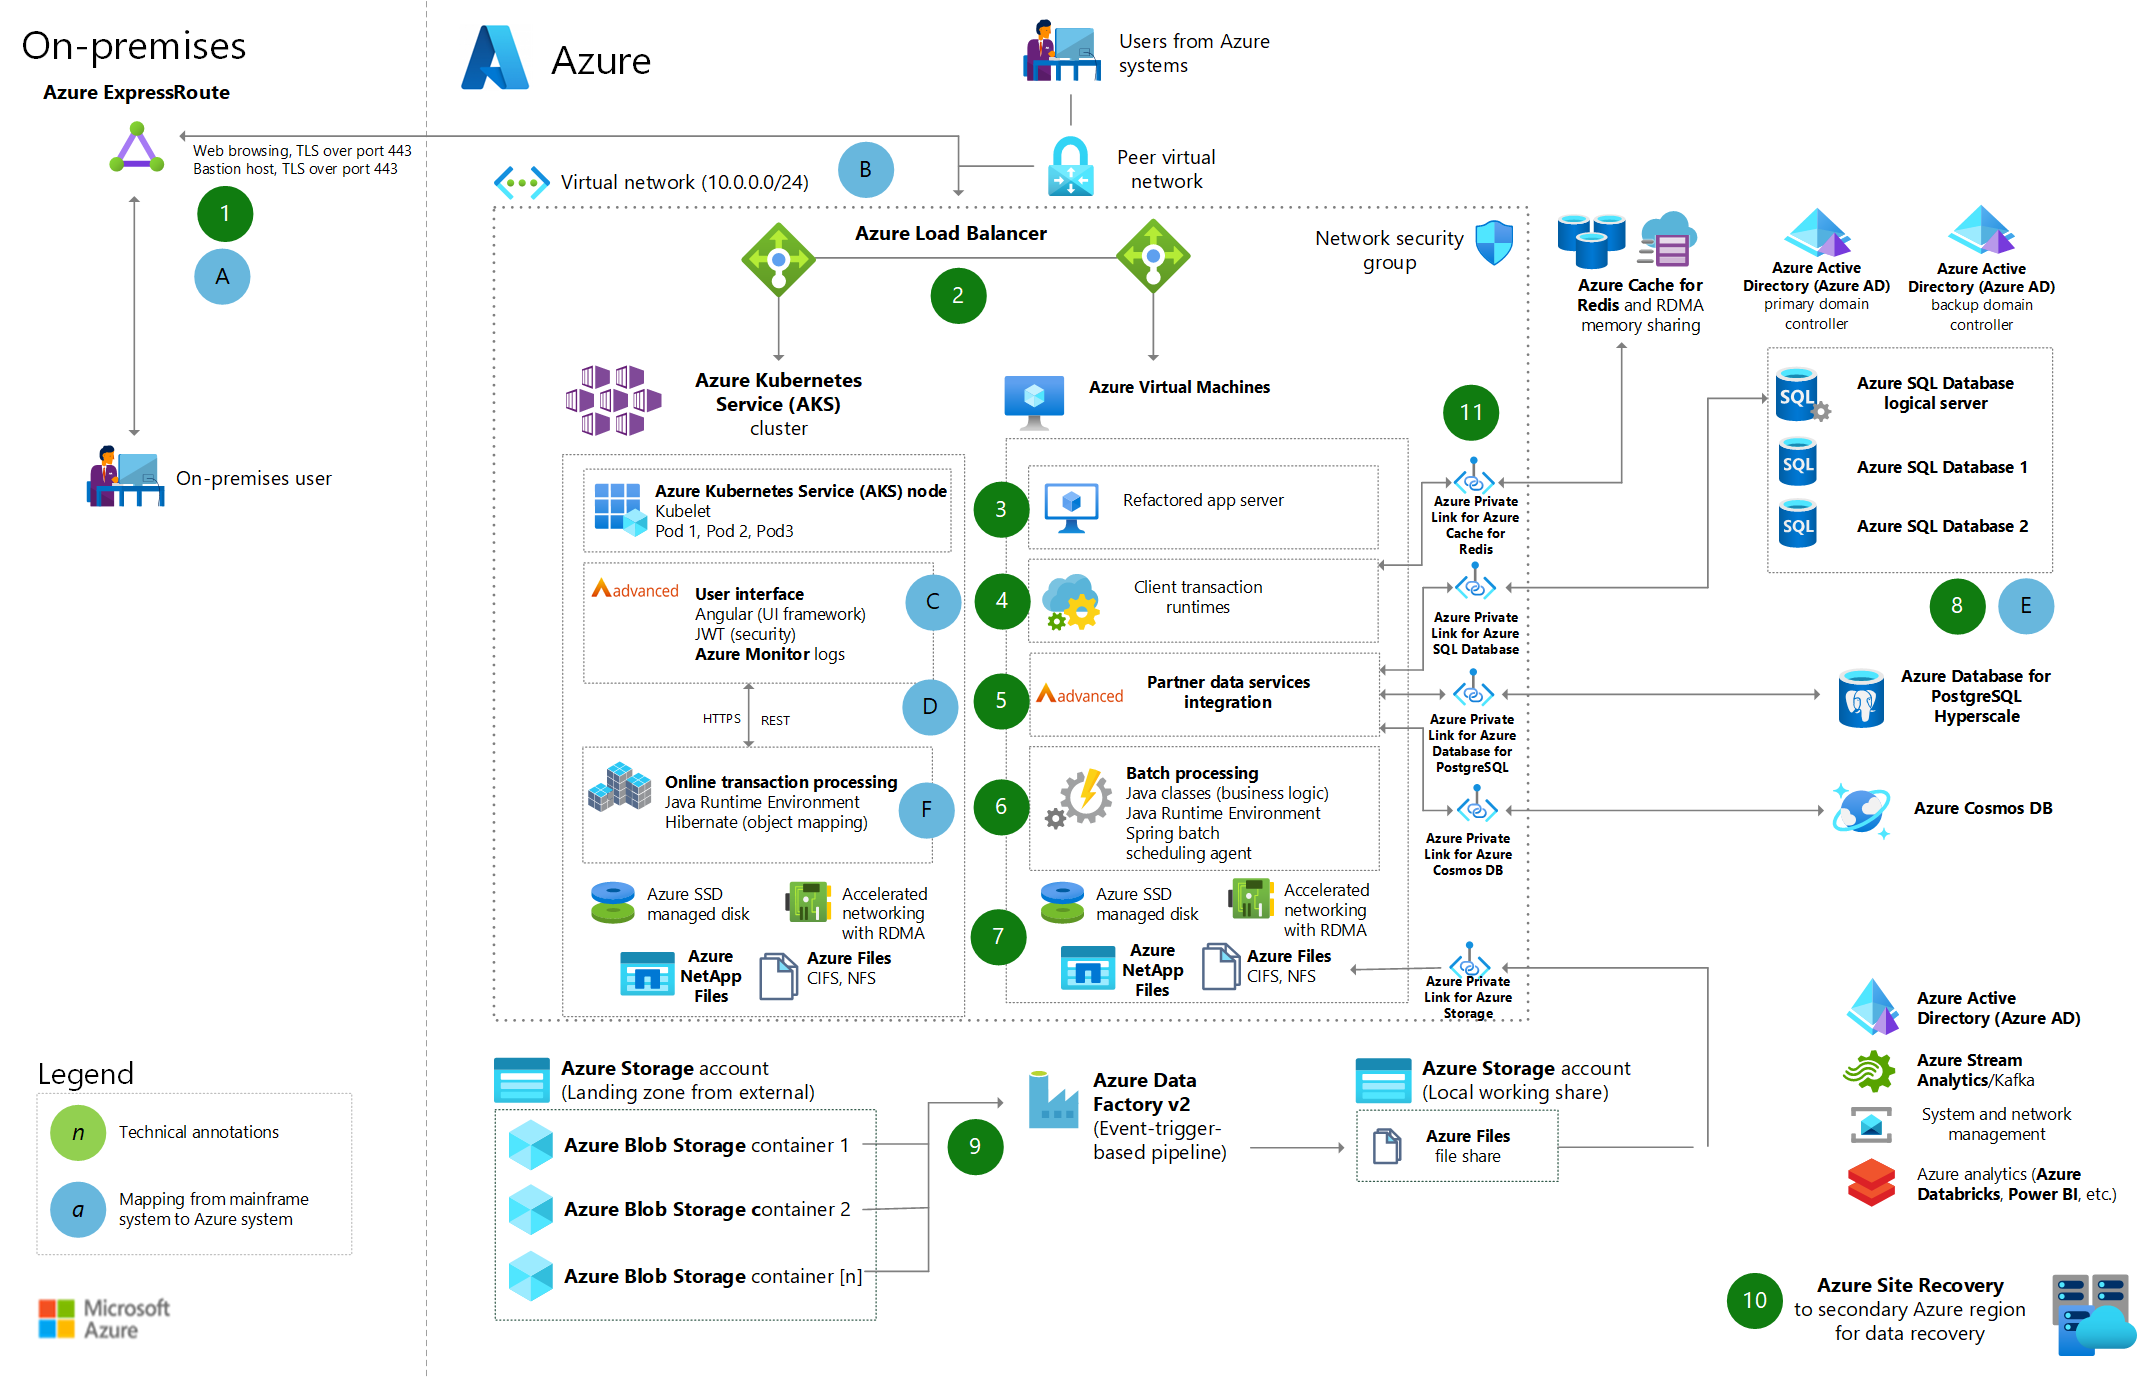 The system architecture on Azure after refactoring